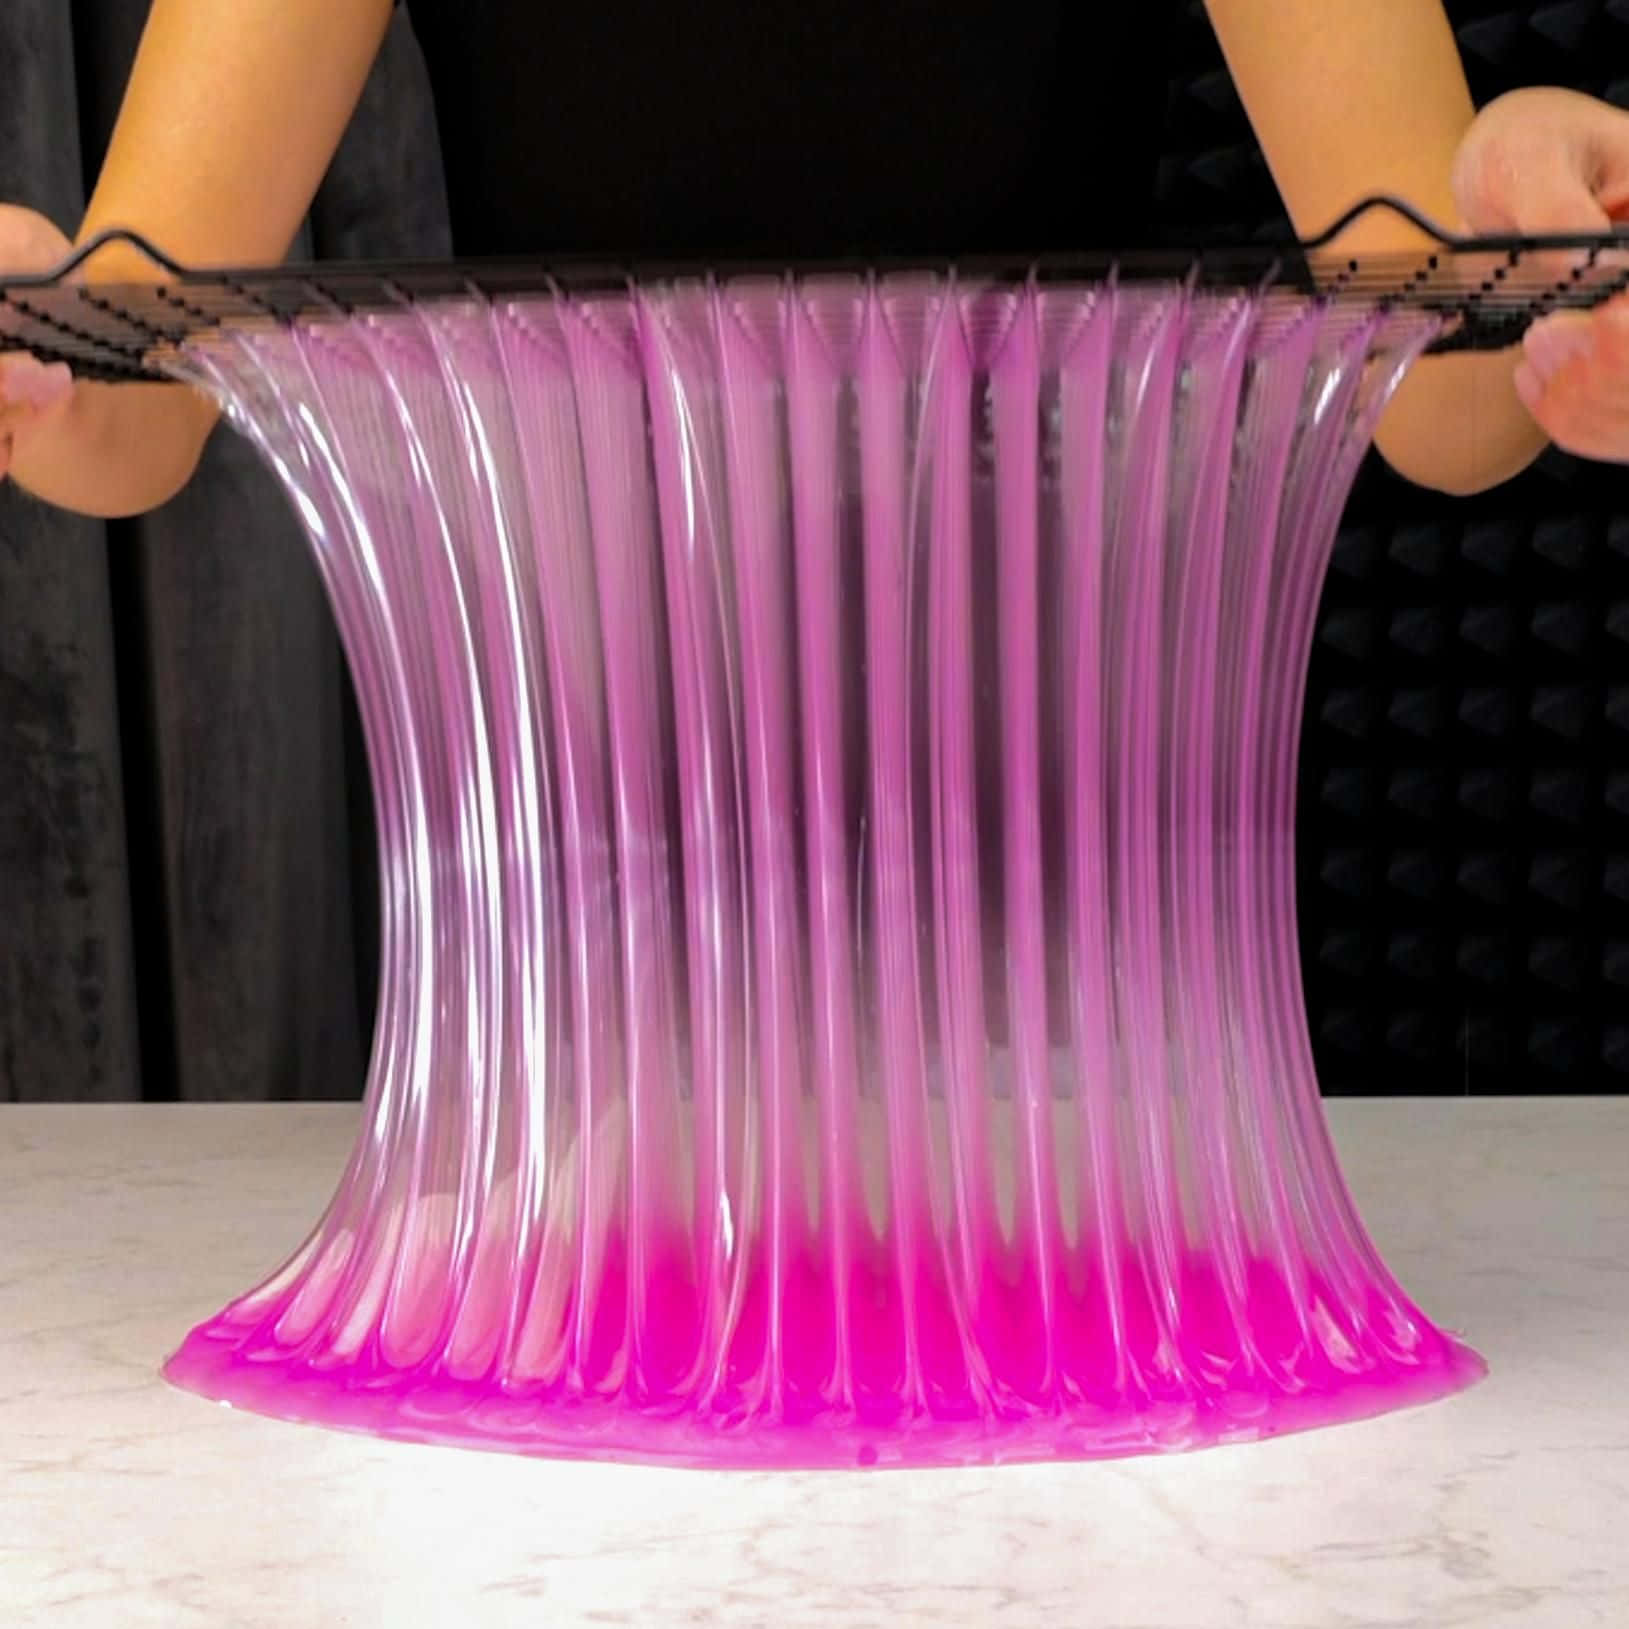 Make your own colorful, gooey slime!